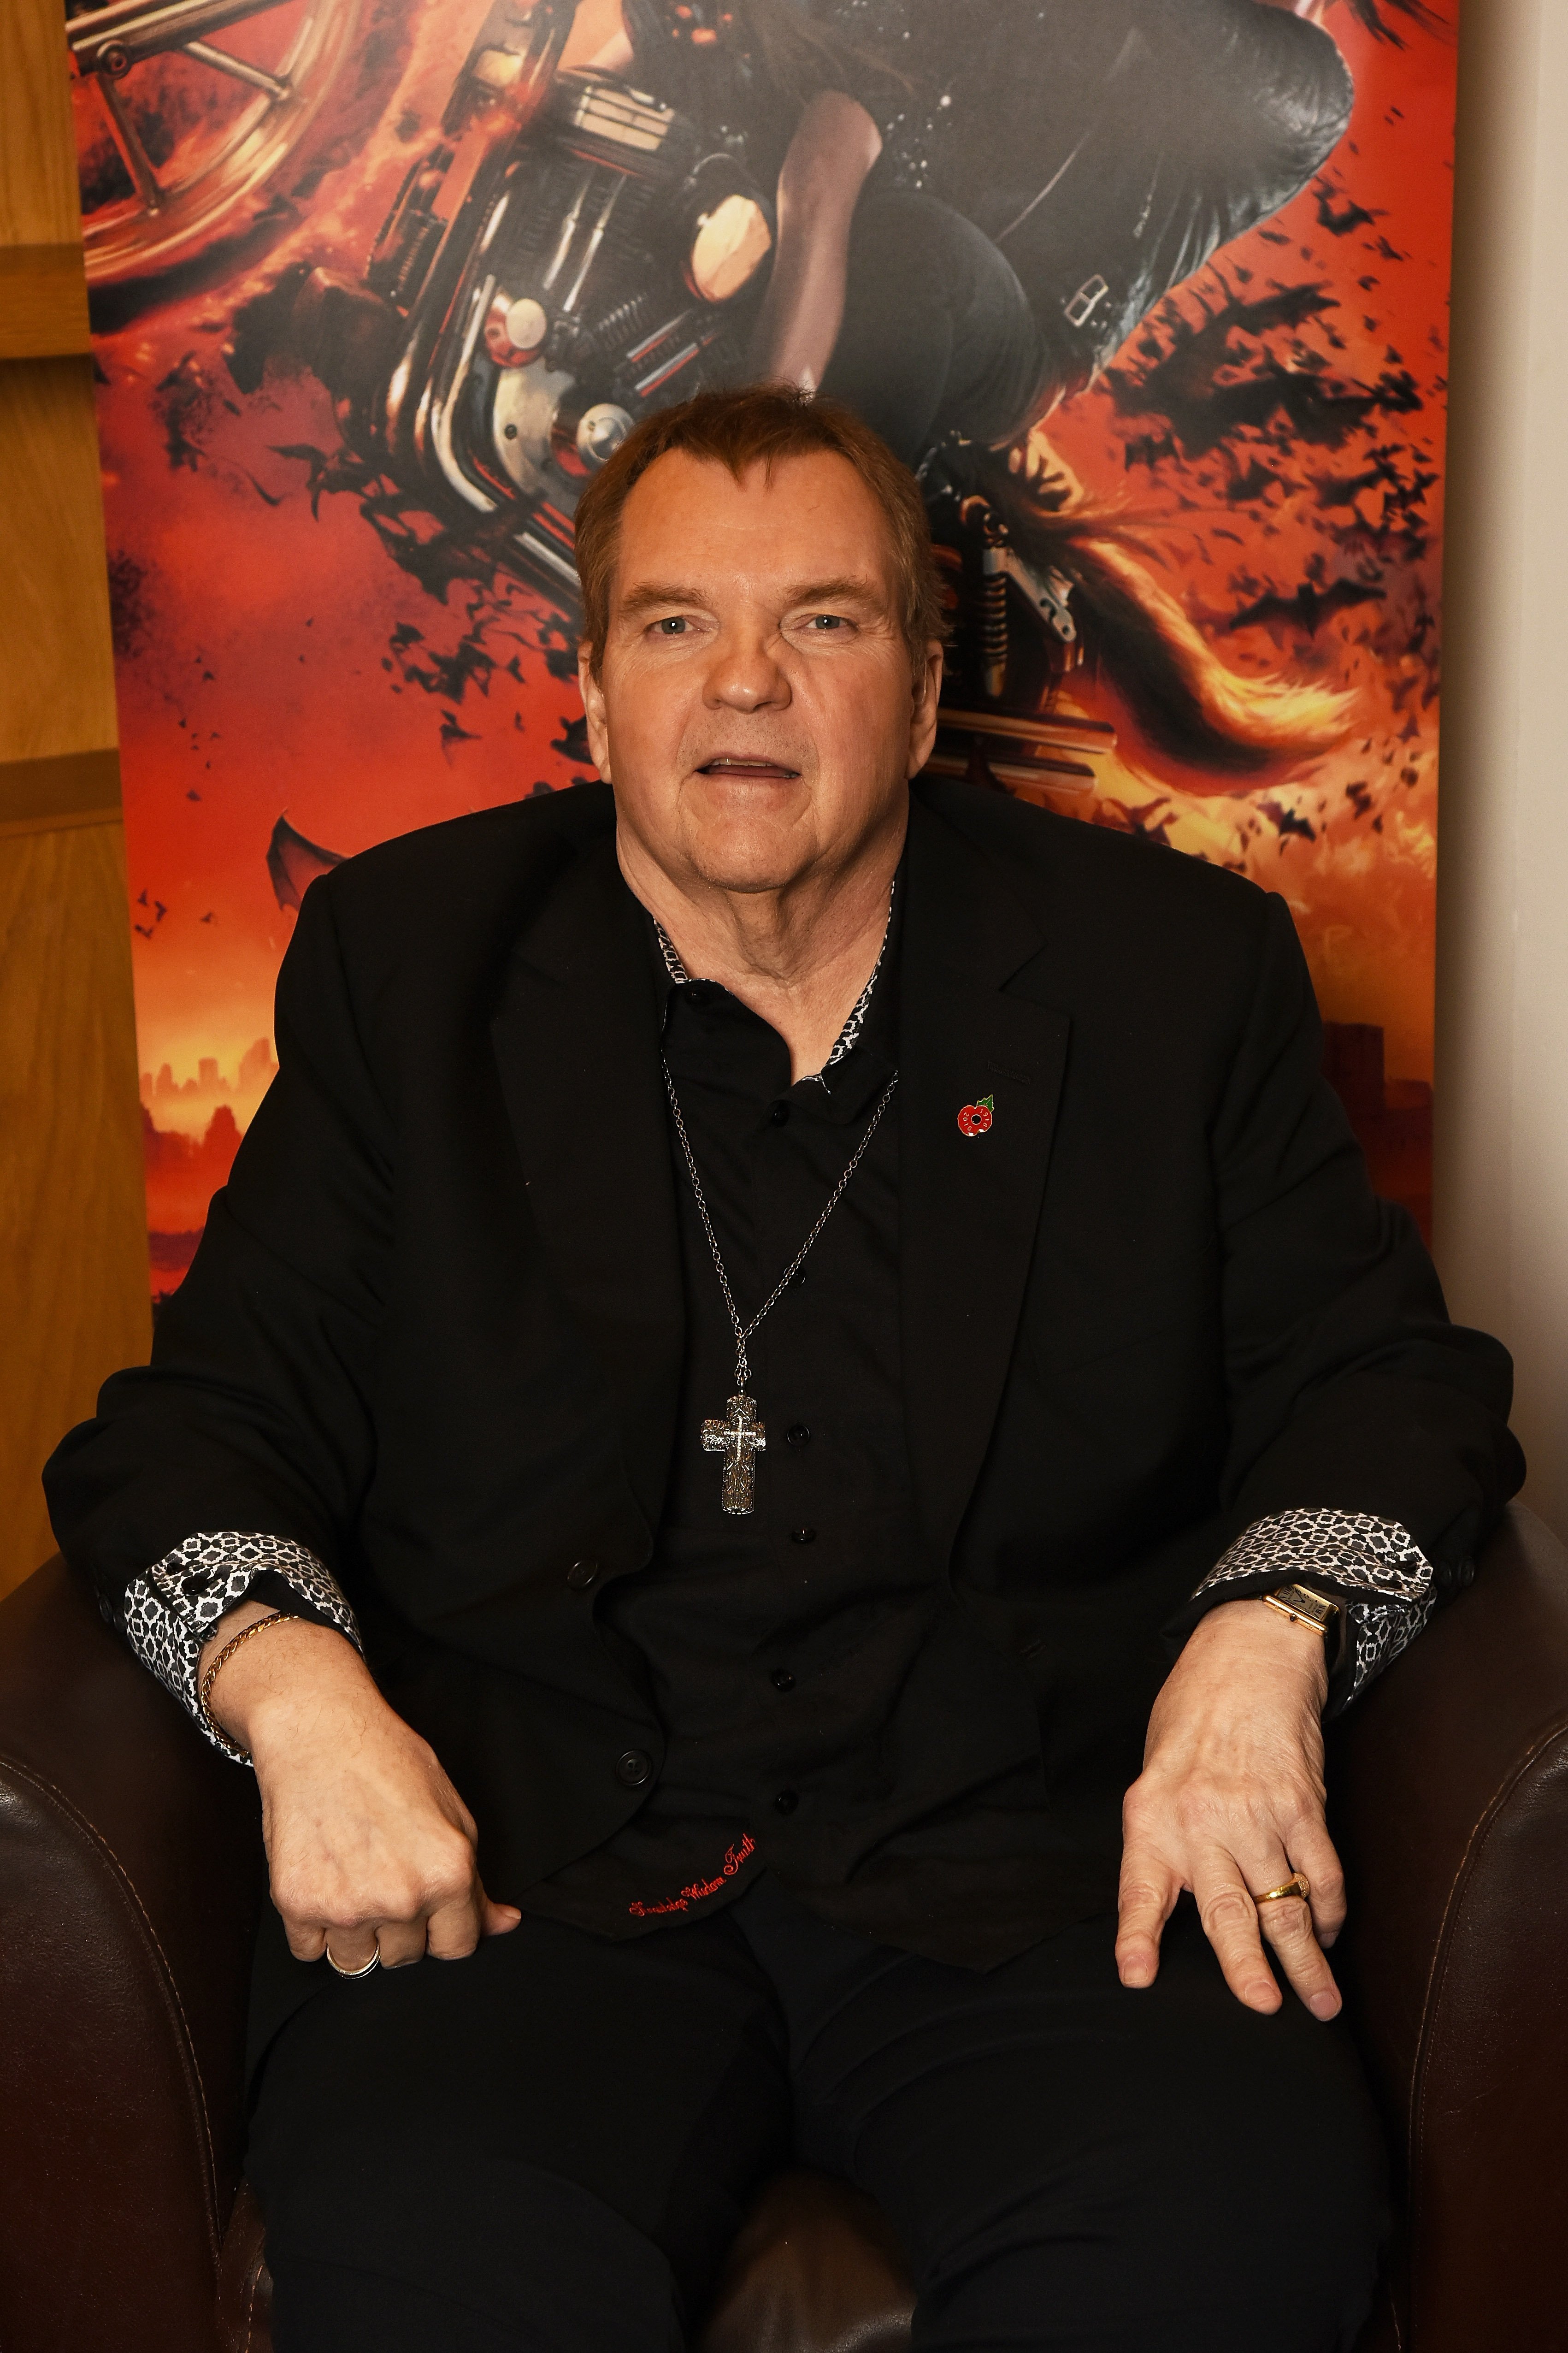 Meat Loaf poses for a portrait at the launch for Jim Steinman's 'Bat Out of Hell The Musical' at the London Coliseum on St Martin's Lane on November 3, 2016, in London, England. | Photo: Getty Images